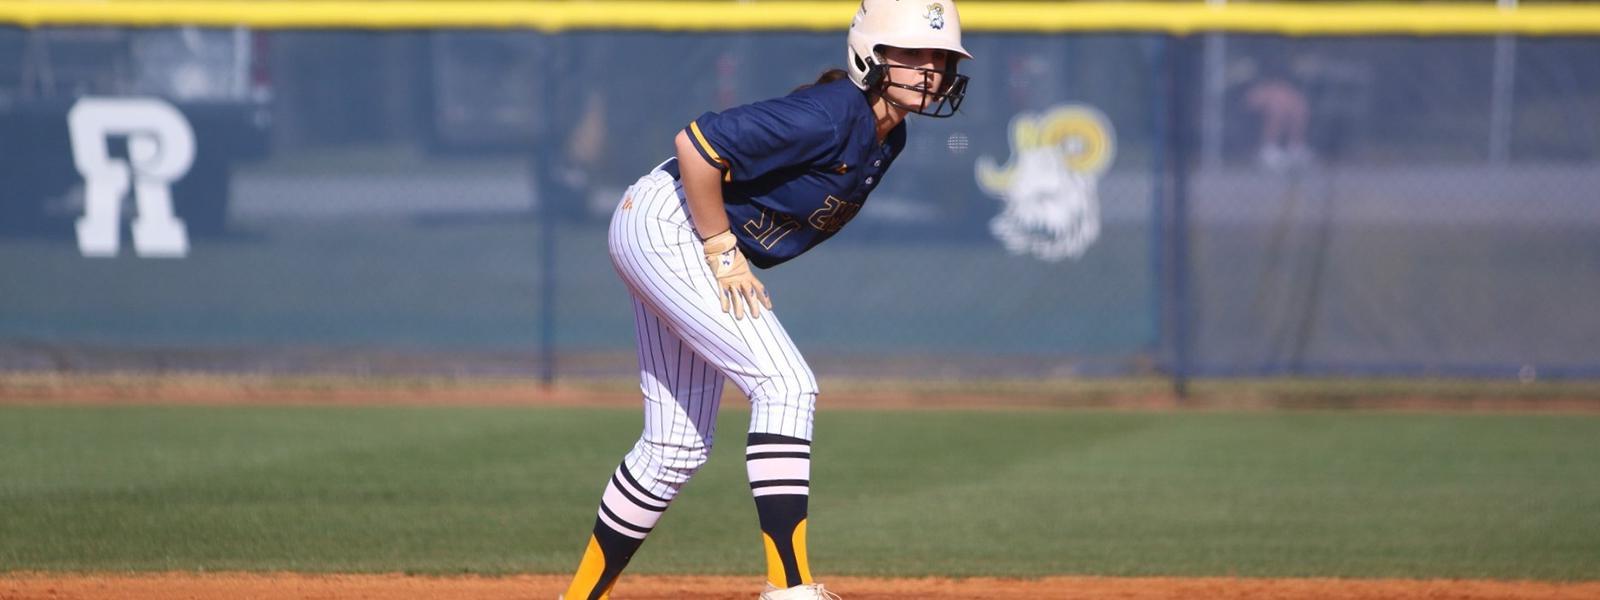 Macey Drye: “I have spent more time with the people on my team than anyone else at CIU, and the relationships that I have formed with my teammates I will never forget."